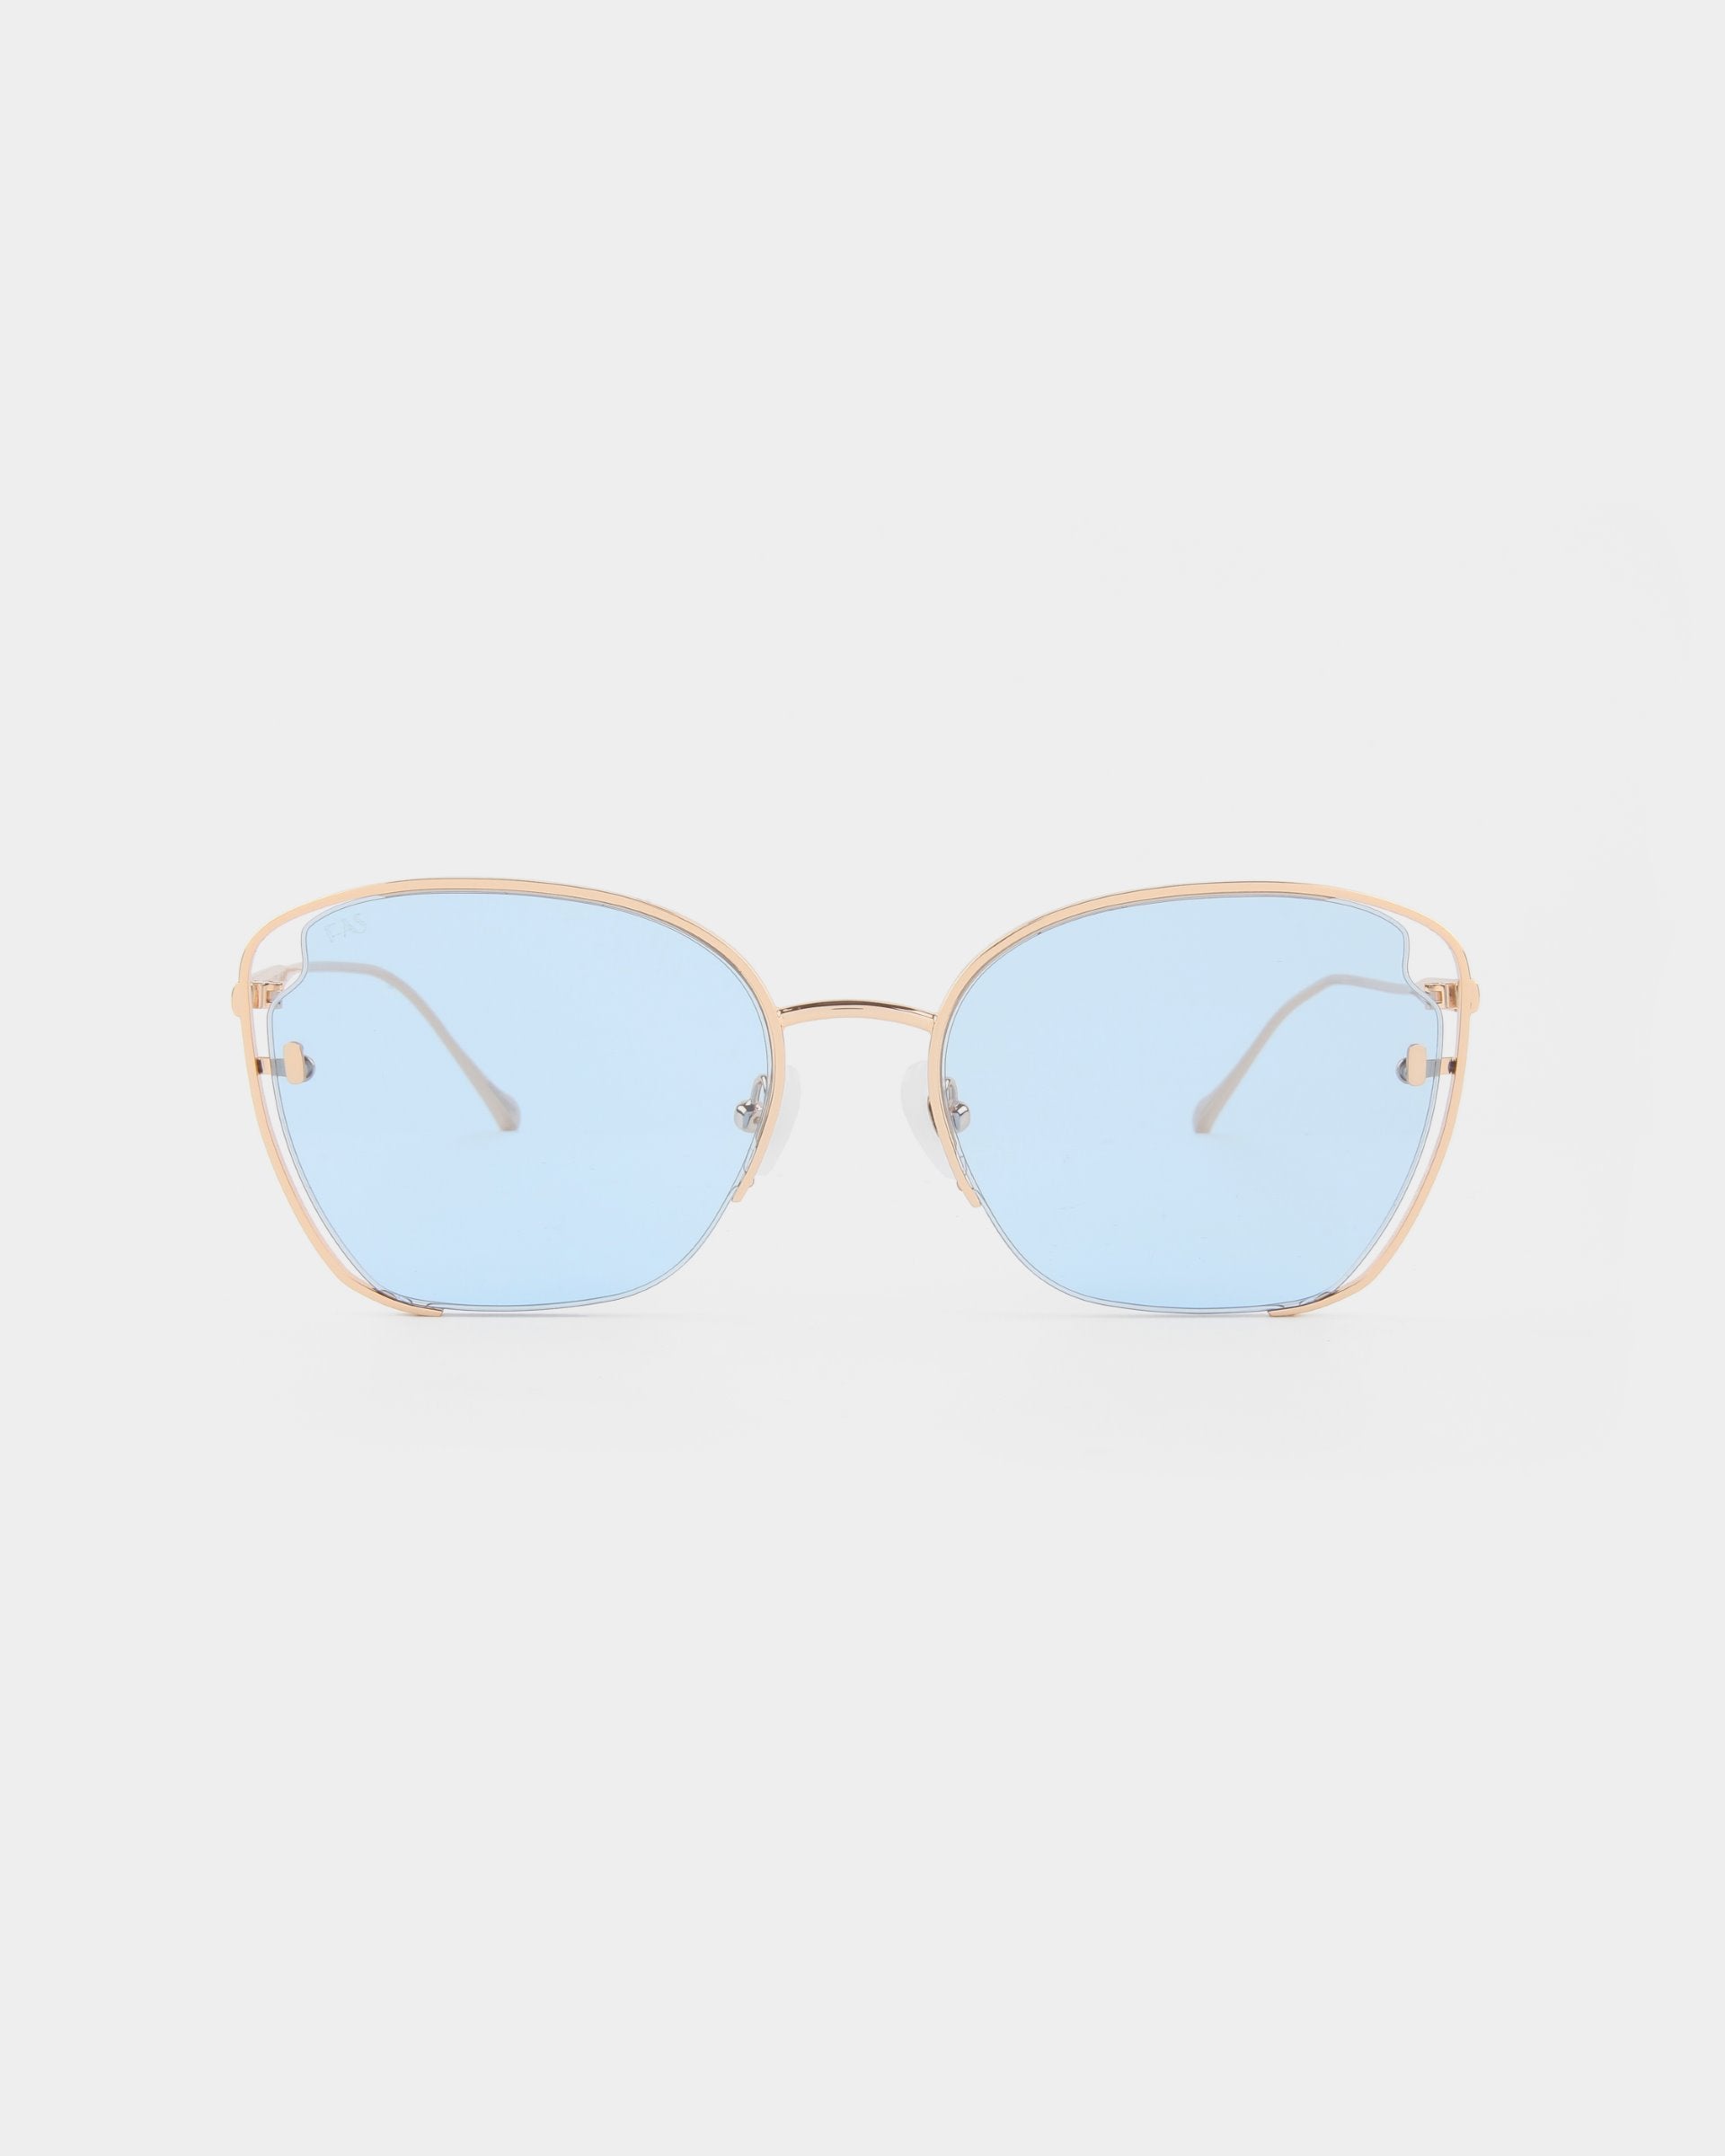 Introducing the Eden sunglasses by For Art's Sake®, a pair of stylish shades featuring 18-karat gold plated metal frames and light blue UVA & UVB-protected lenses. The design sports slightly rounded square lenses, with a thin, delicate nose bridge and temples that add an elegant touch to the overall appearance.